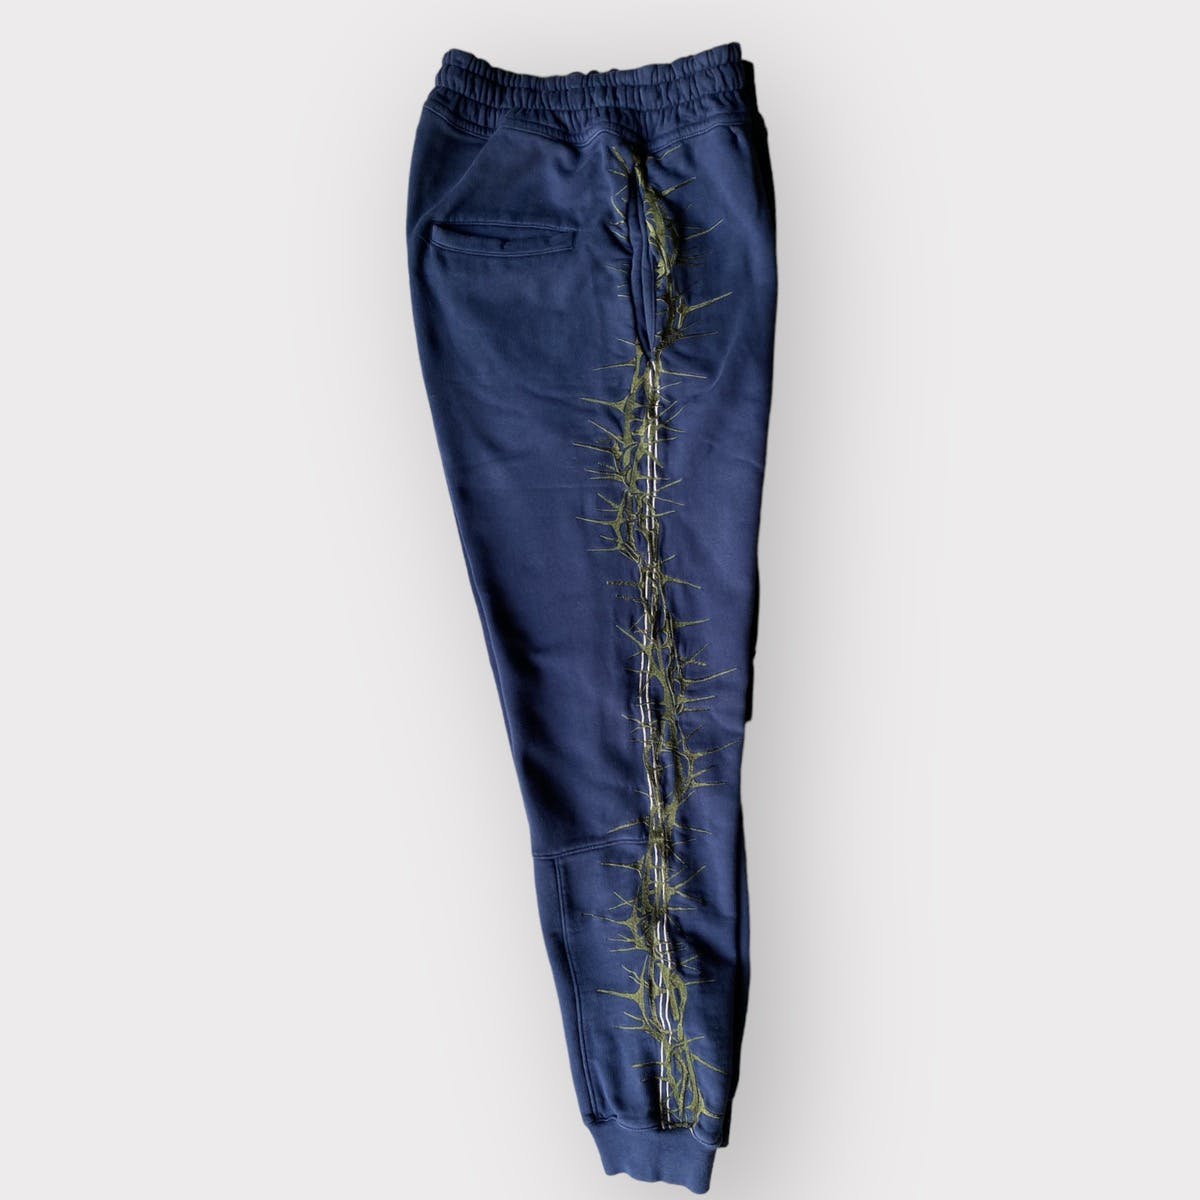 2019 Barb Wire Embroidered Sweatpants - 1